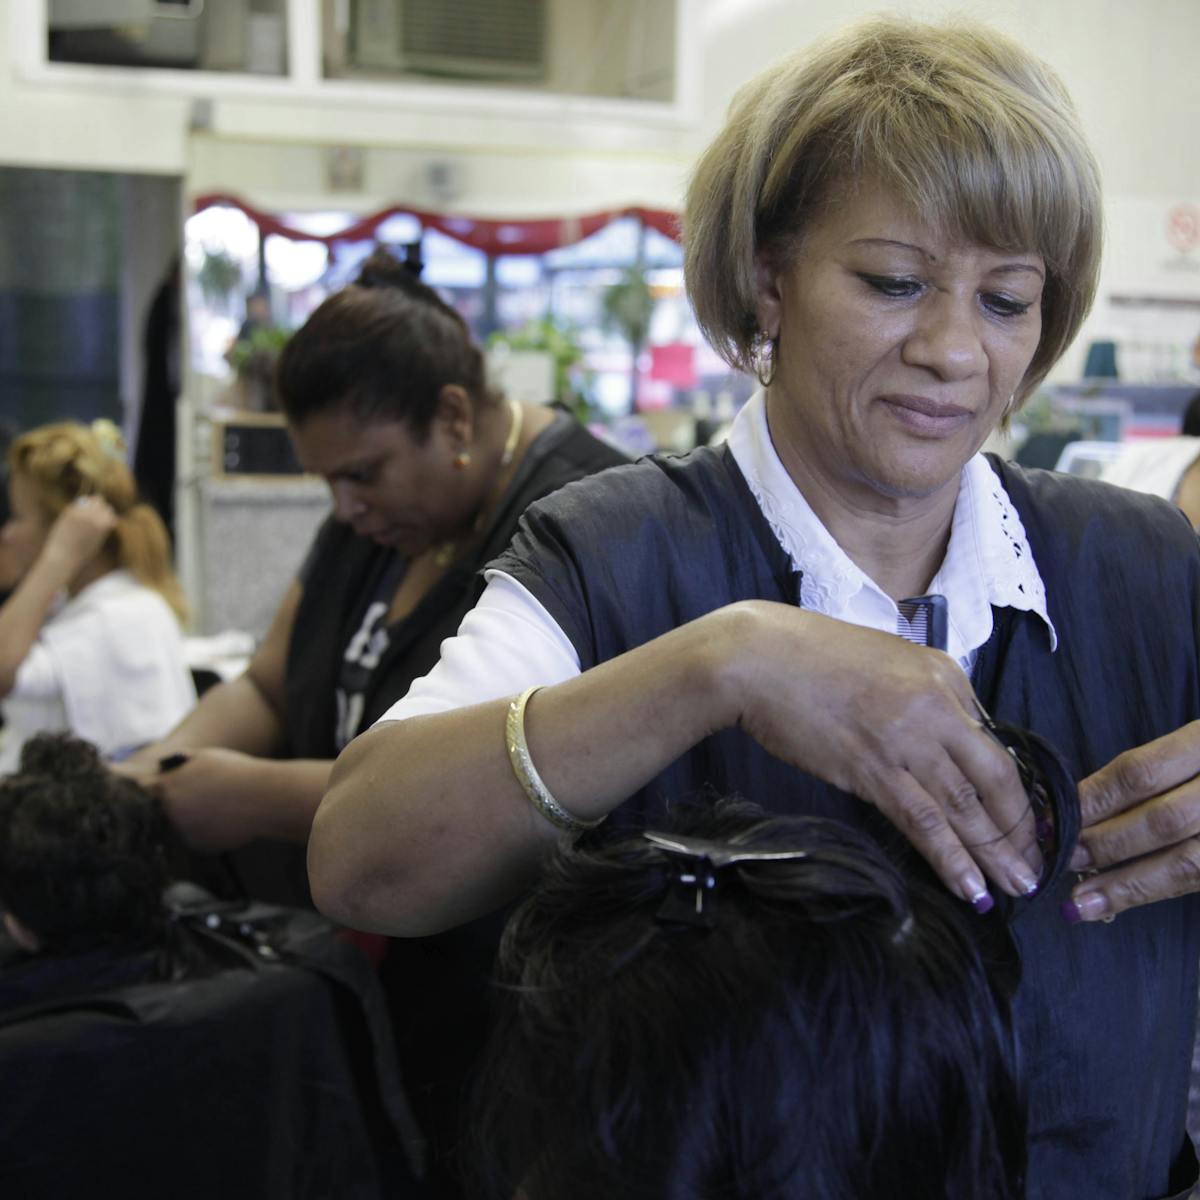 At the beauty salon, Dominican-American women conflicted over quest for straight  hair